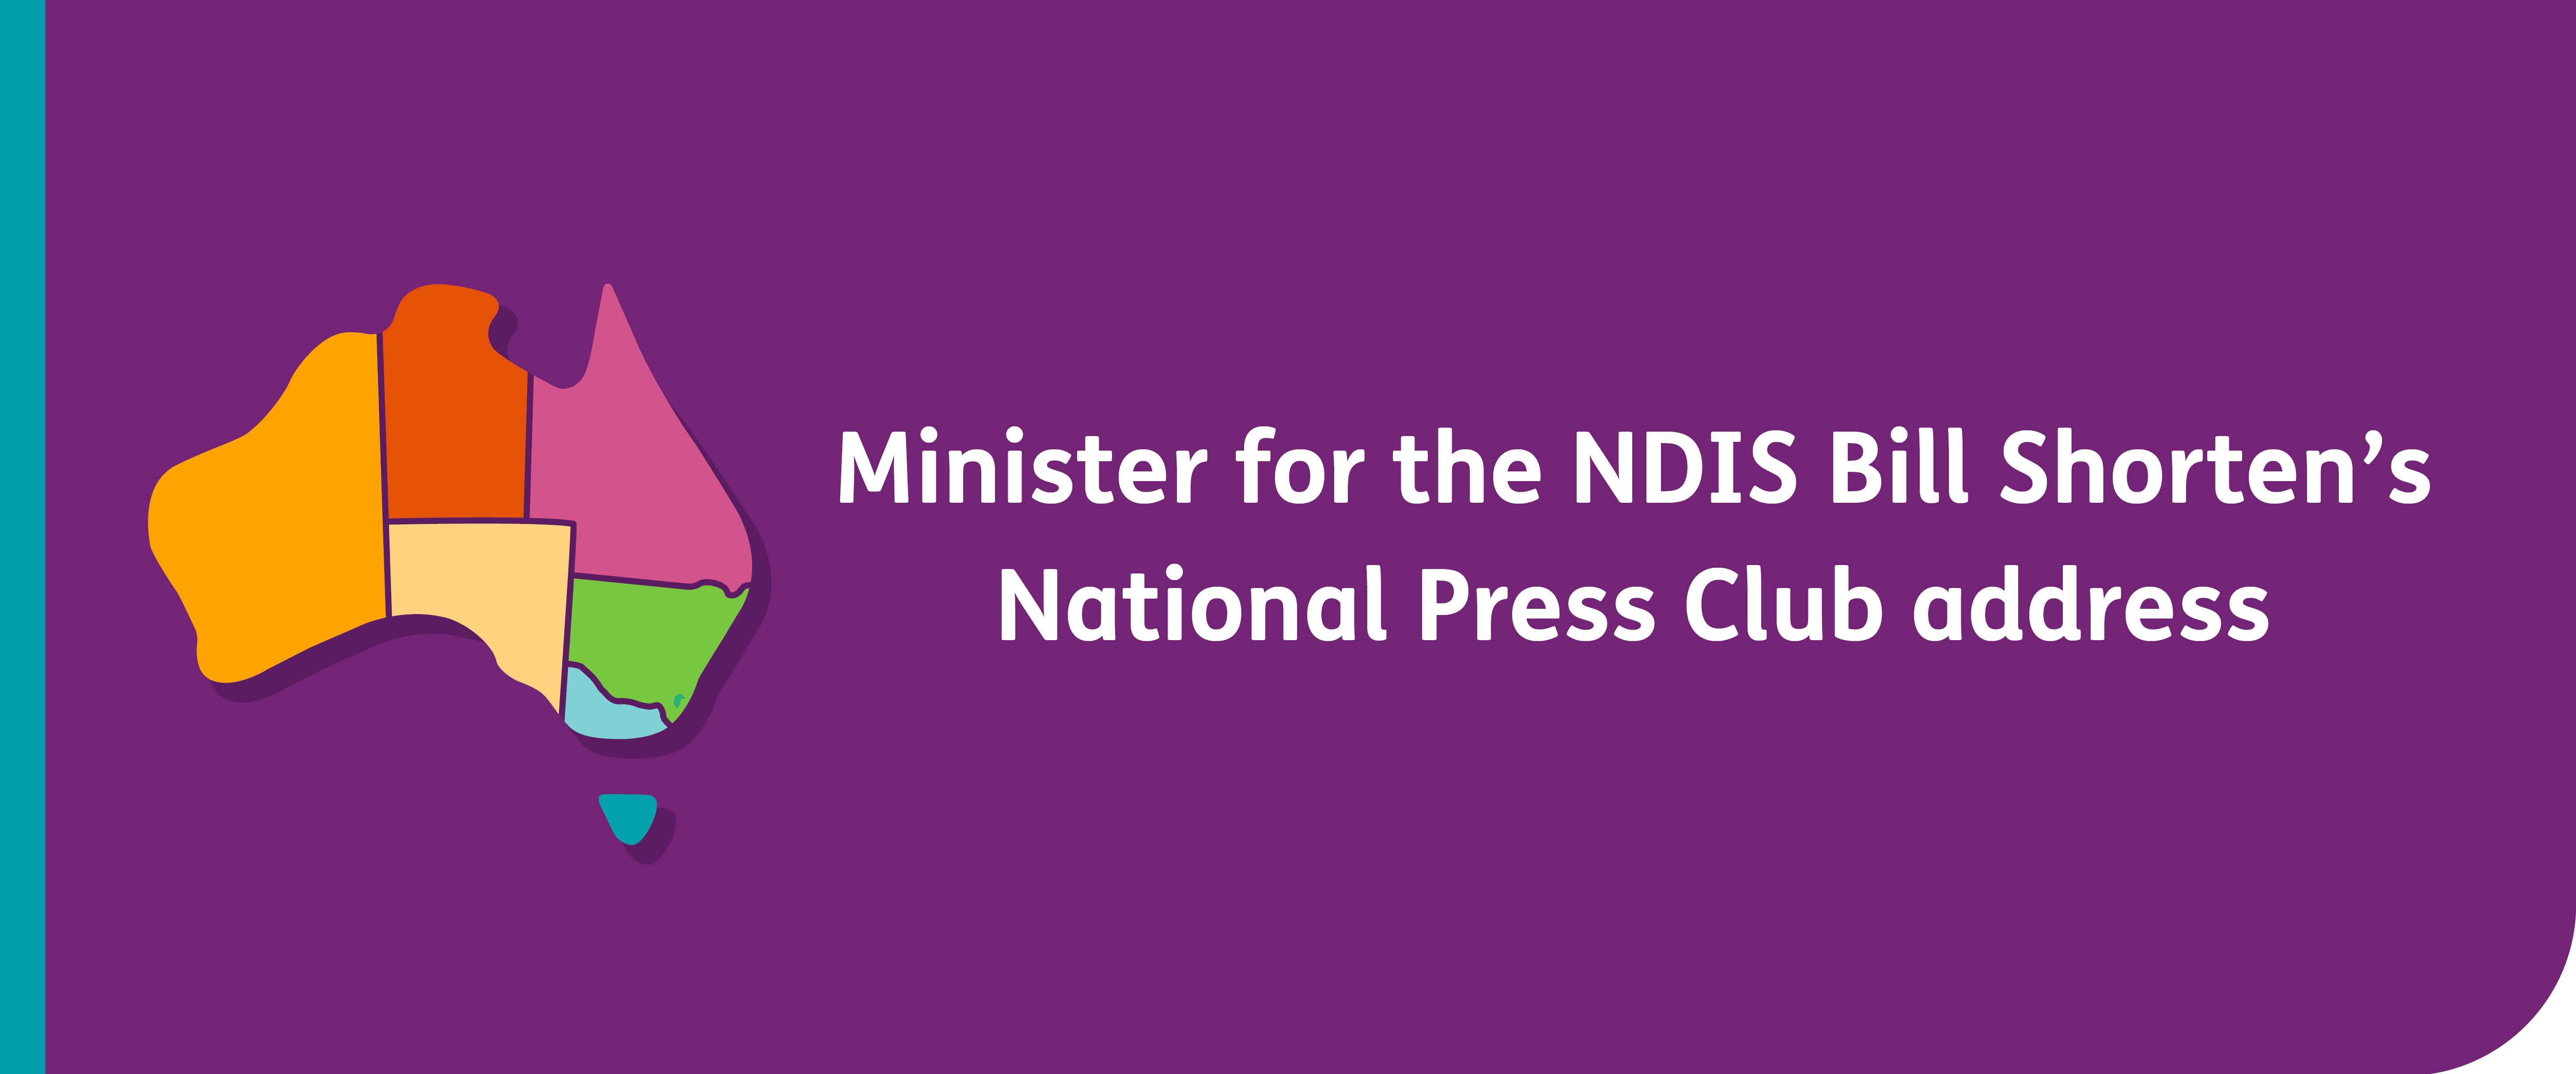 Minister for the NDIS Bill Shorten's National Press Club address with a cartoon of the outline of Australia